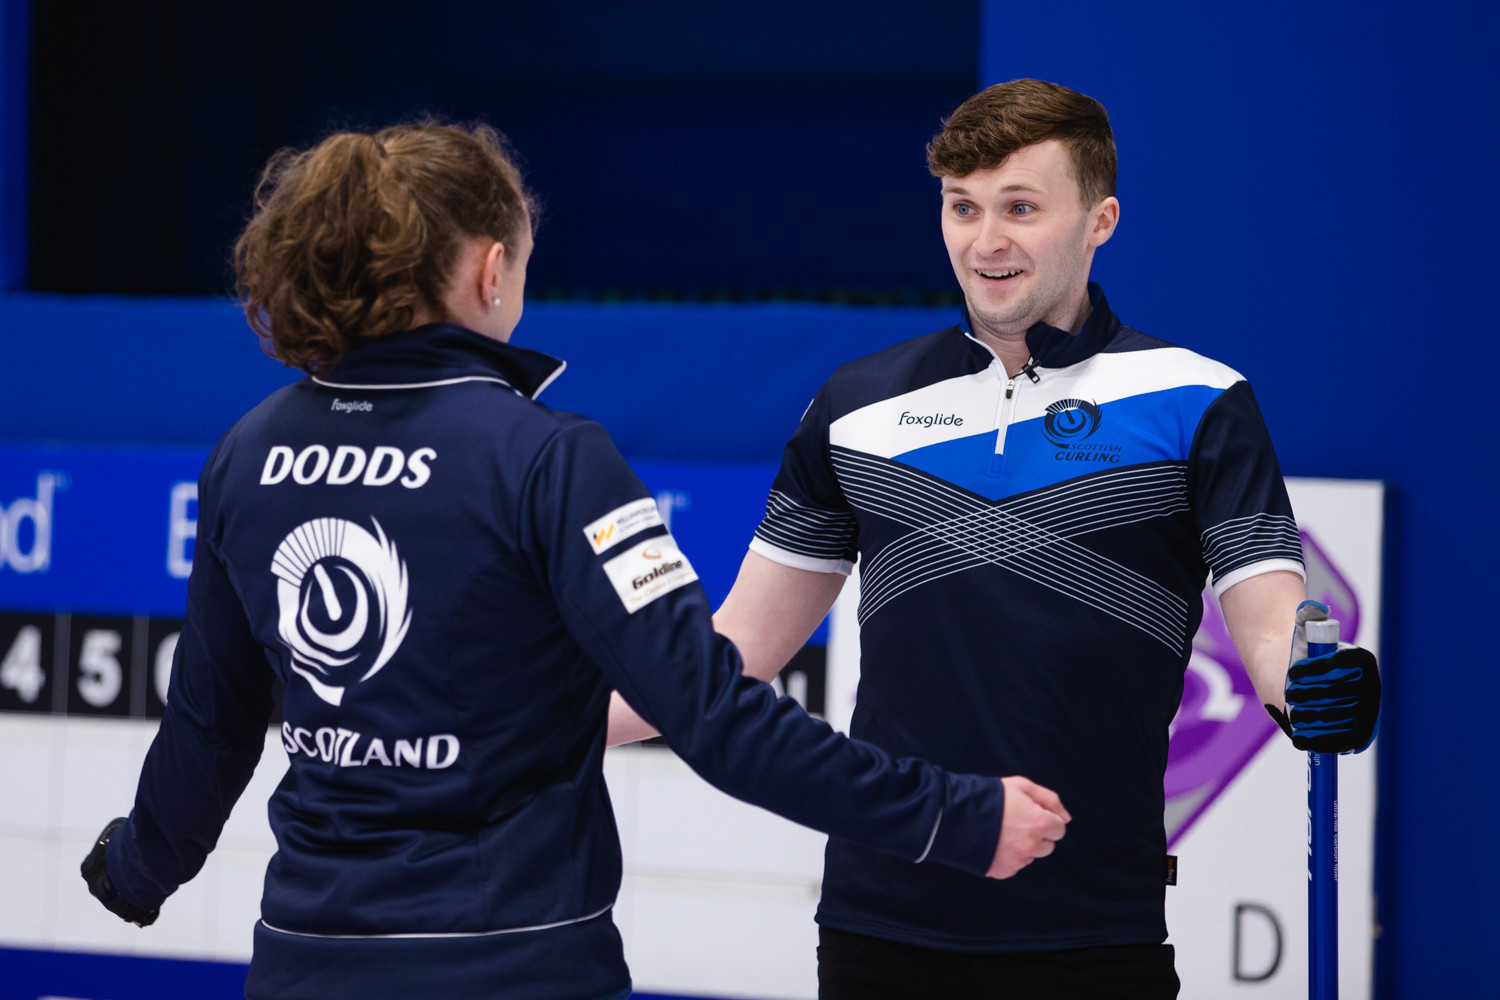 Scotland's Bruce Mouat and Jennifer Dodds are the current mixed doubles curling world champions ©WCF/Celine Stucki